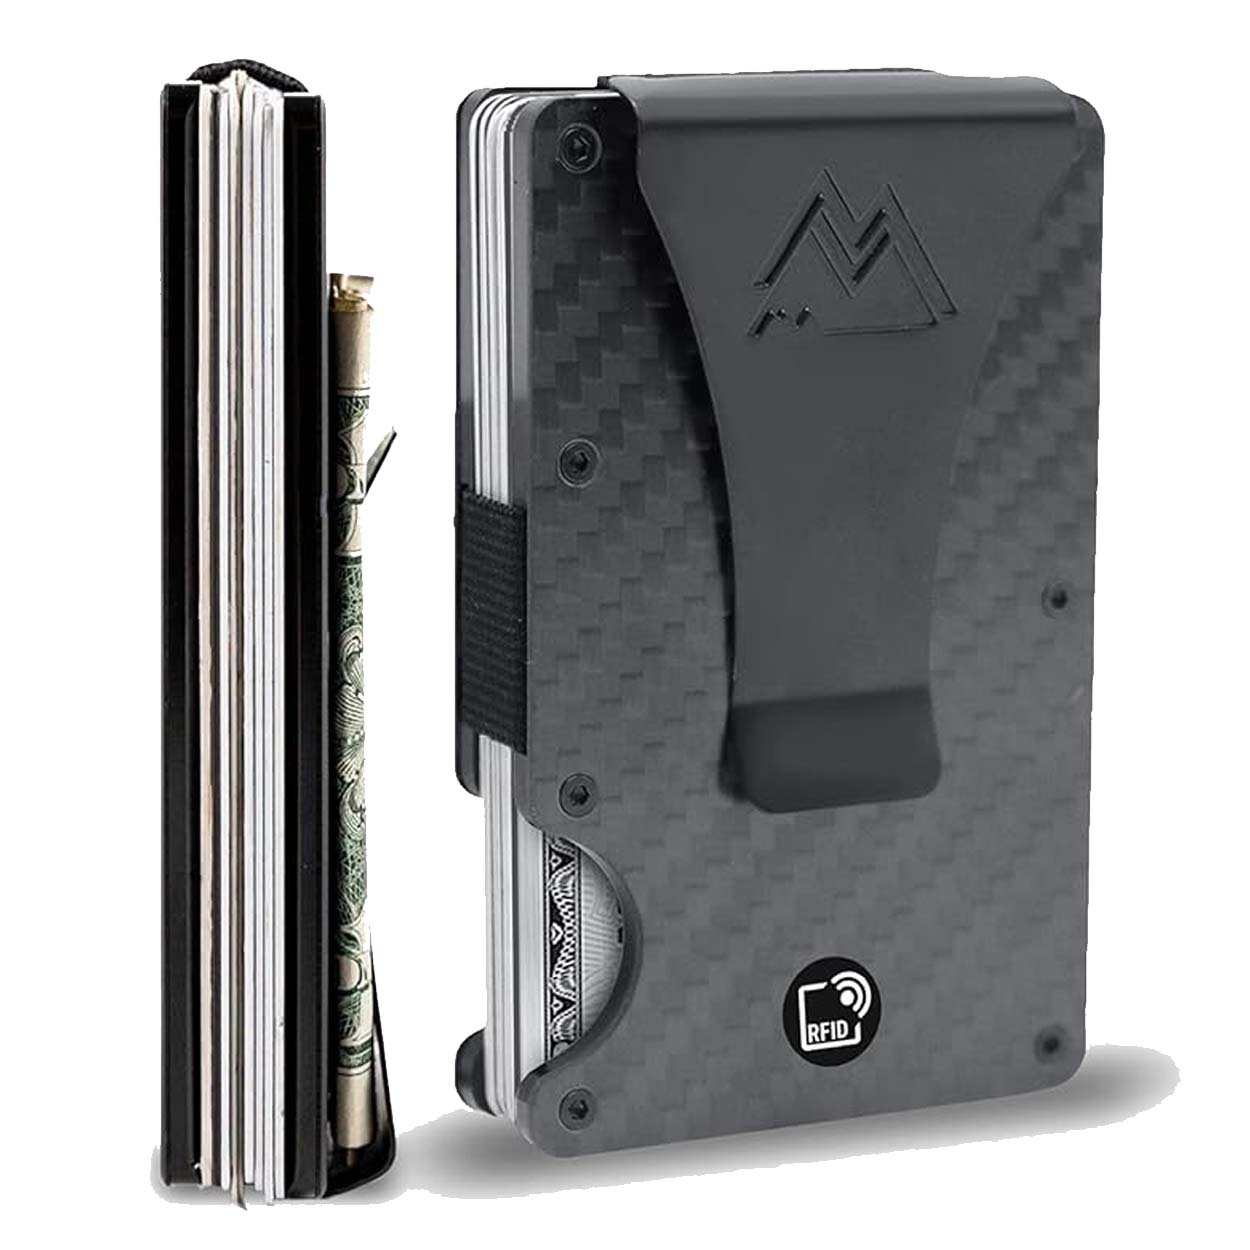 Mountain Voyage Minimalist Wallet for Men with easy card access and card holders